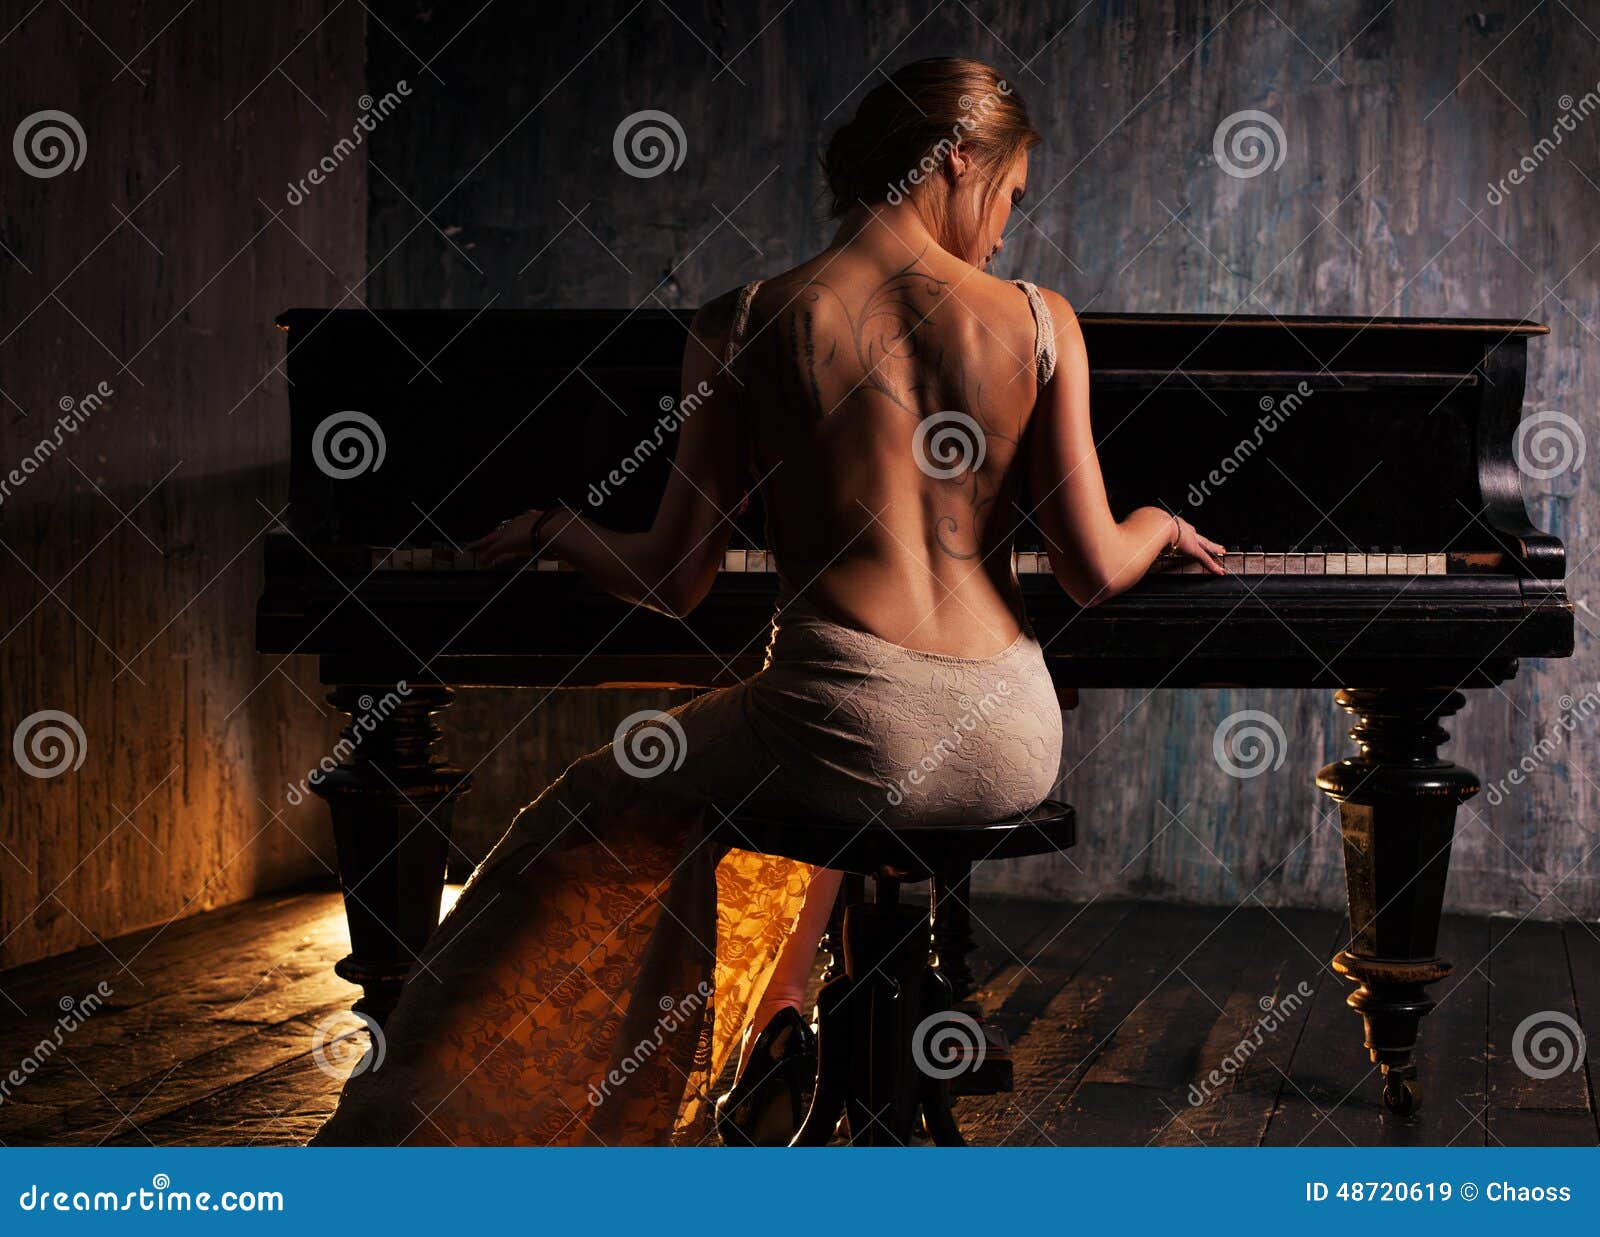 Porn Pictures Blonde Photography Naked Pianoman